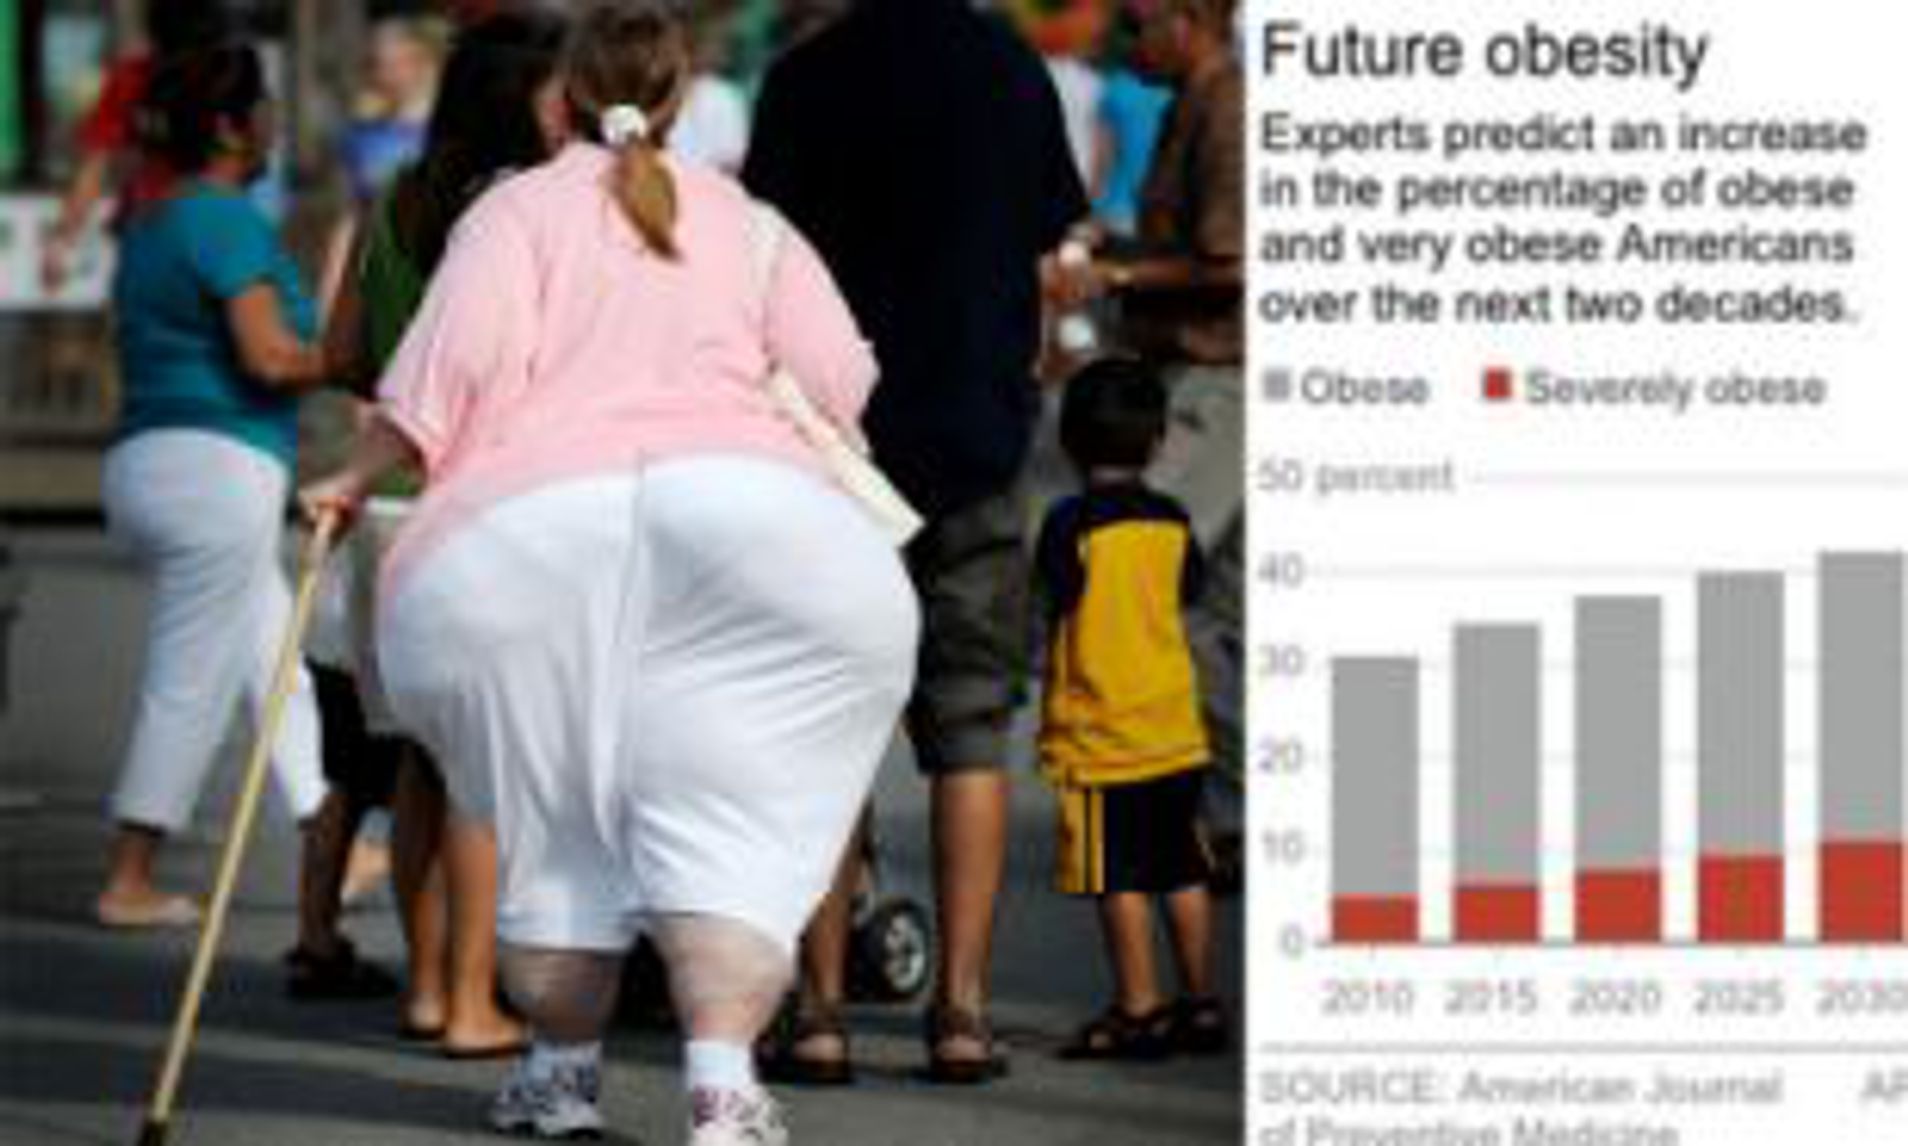 How Many Americans are Overweight